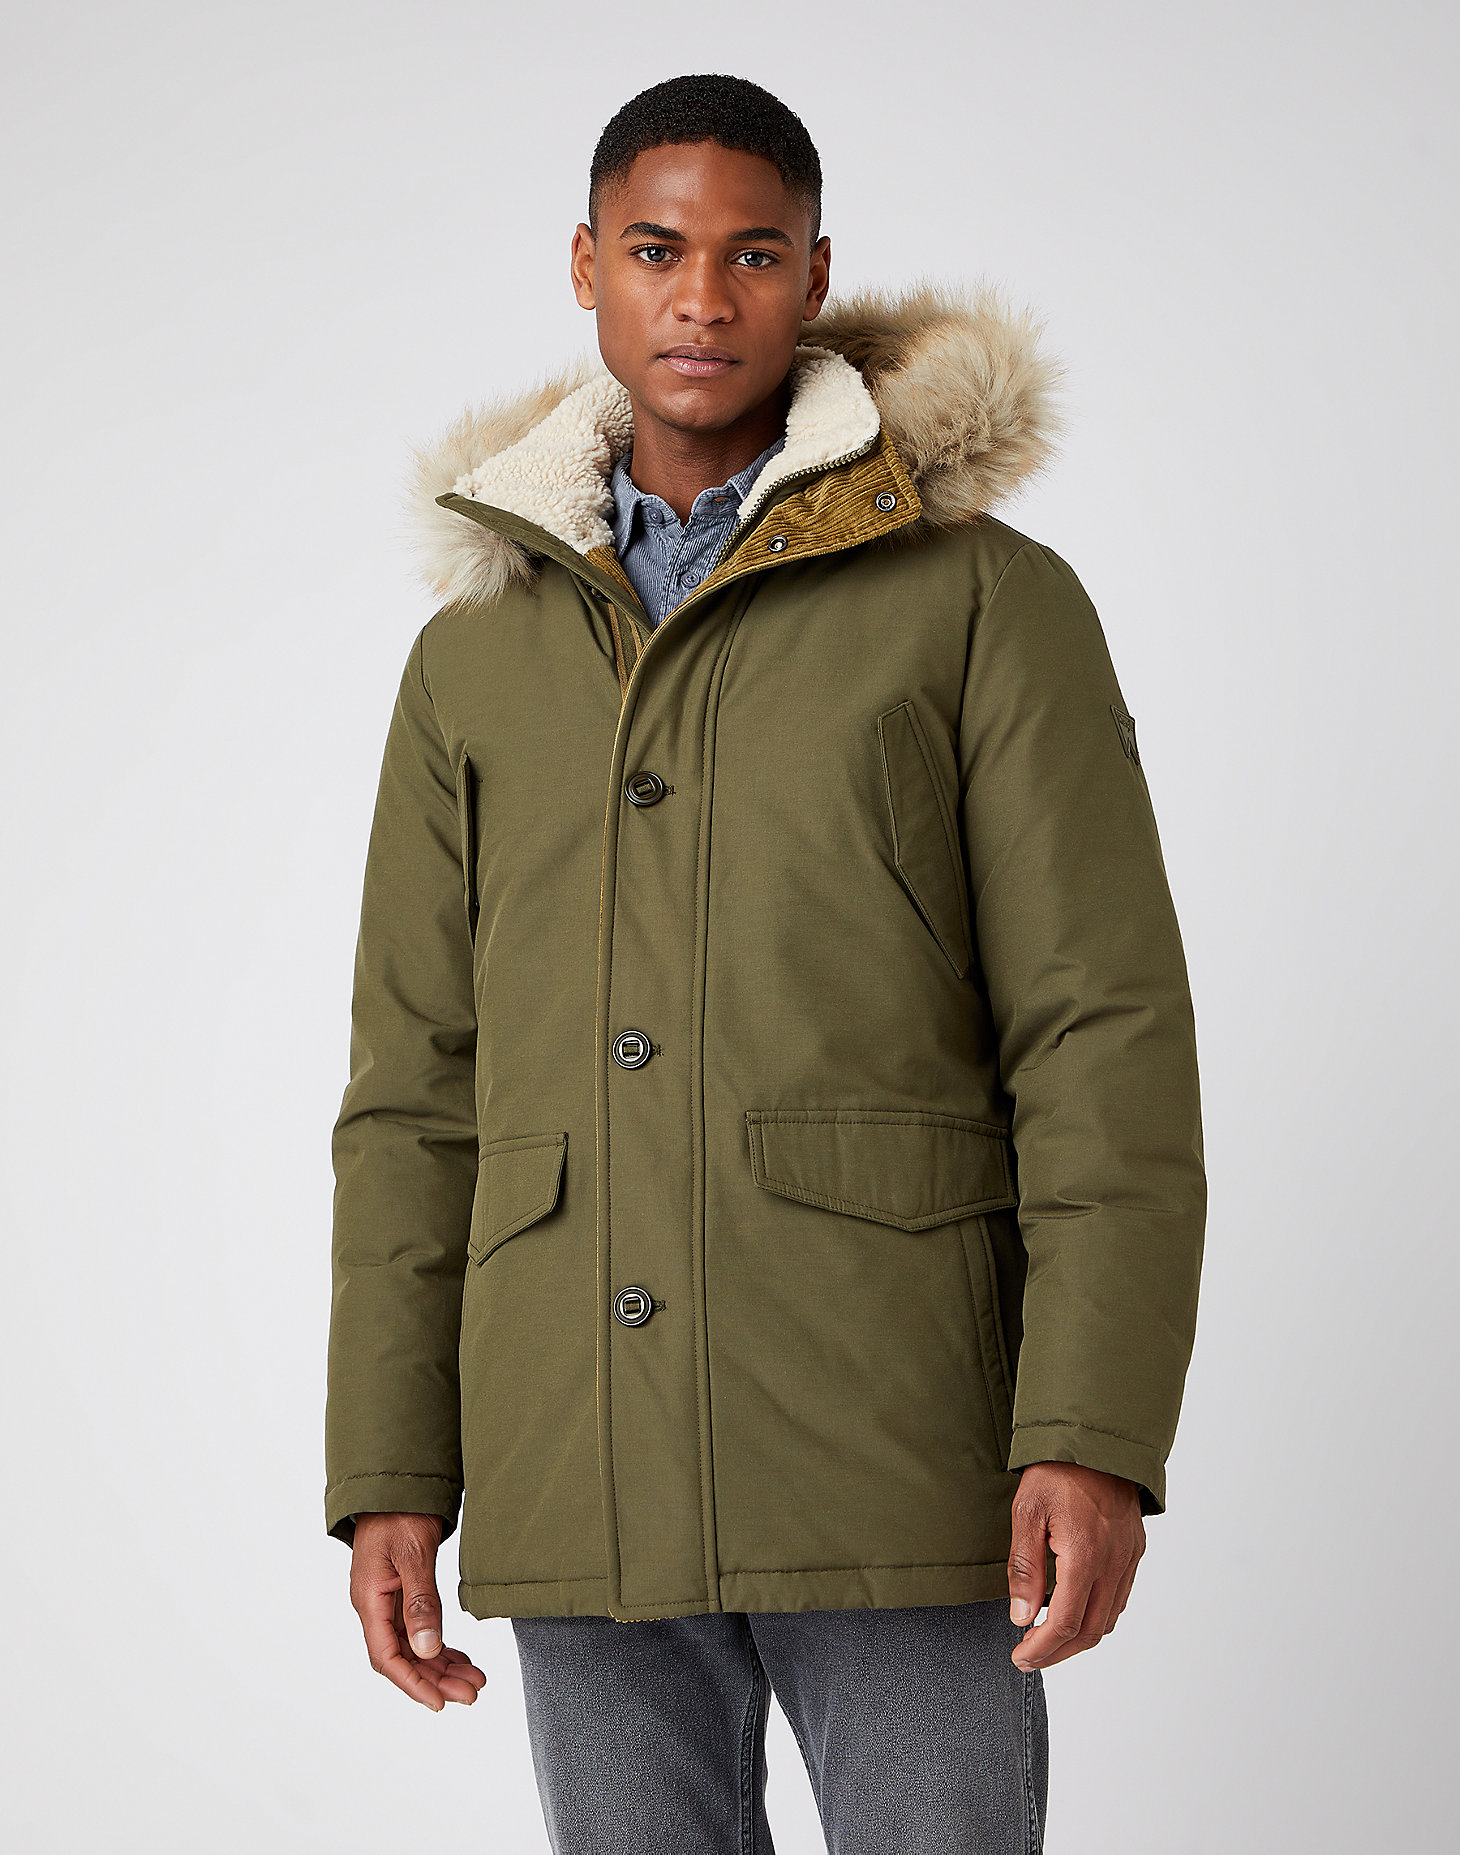 Parka Jacket in Ivy Green main view